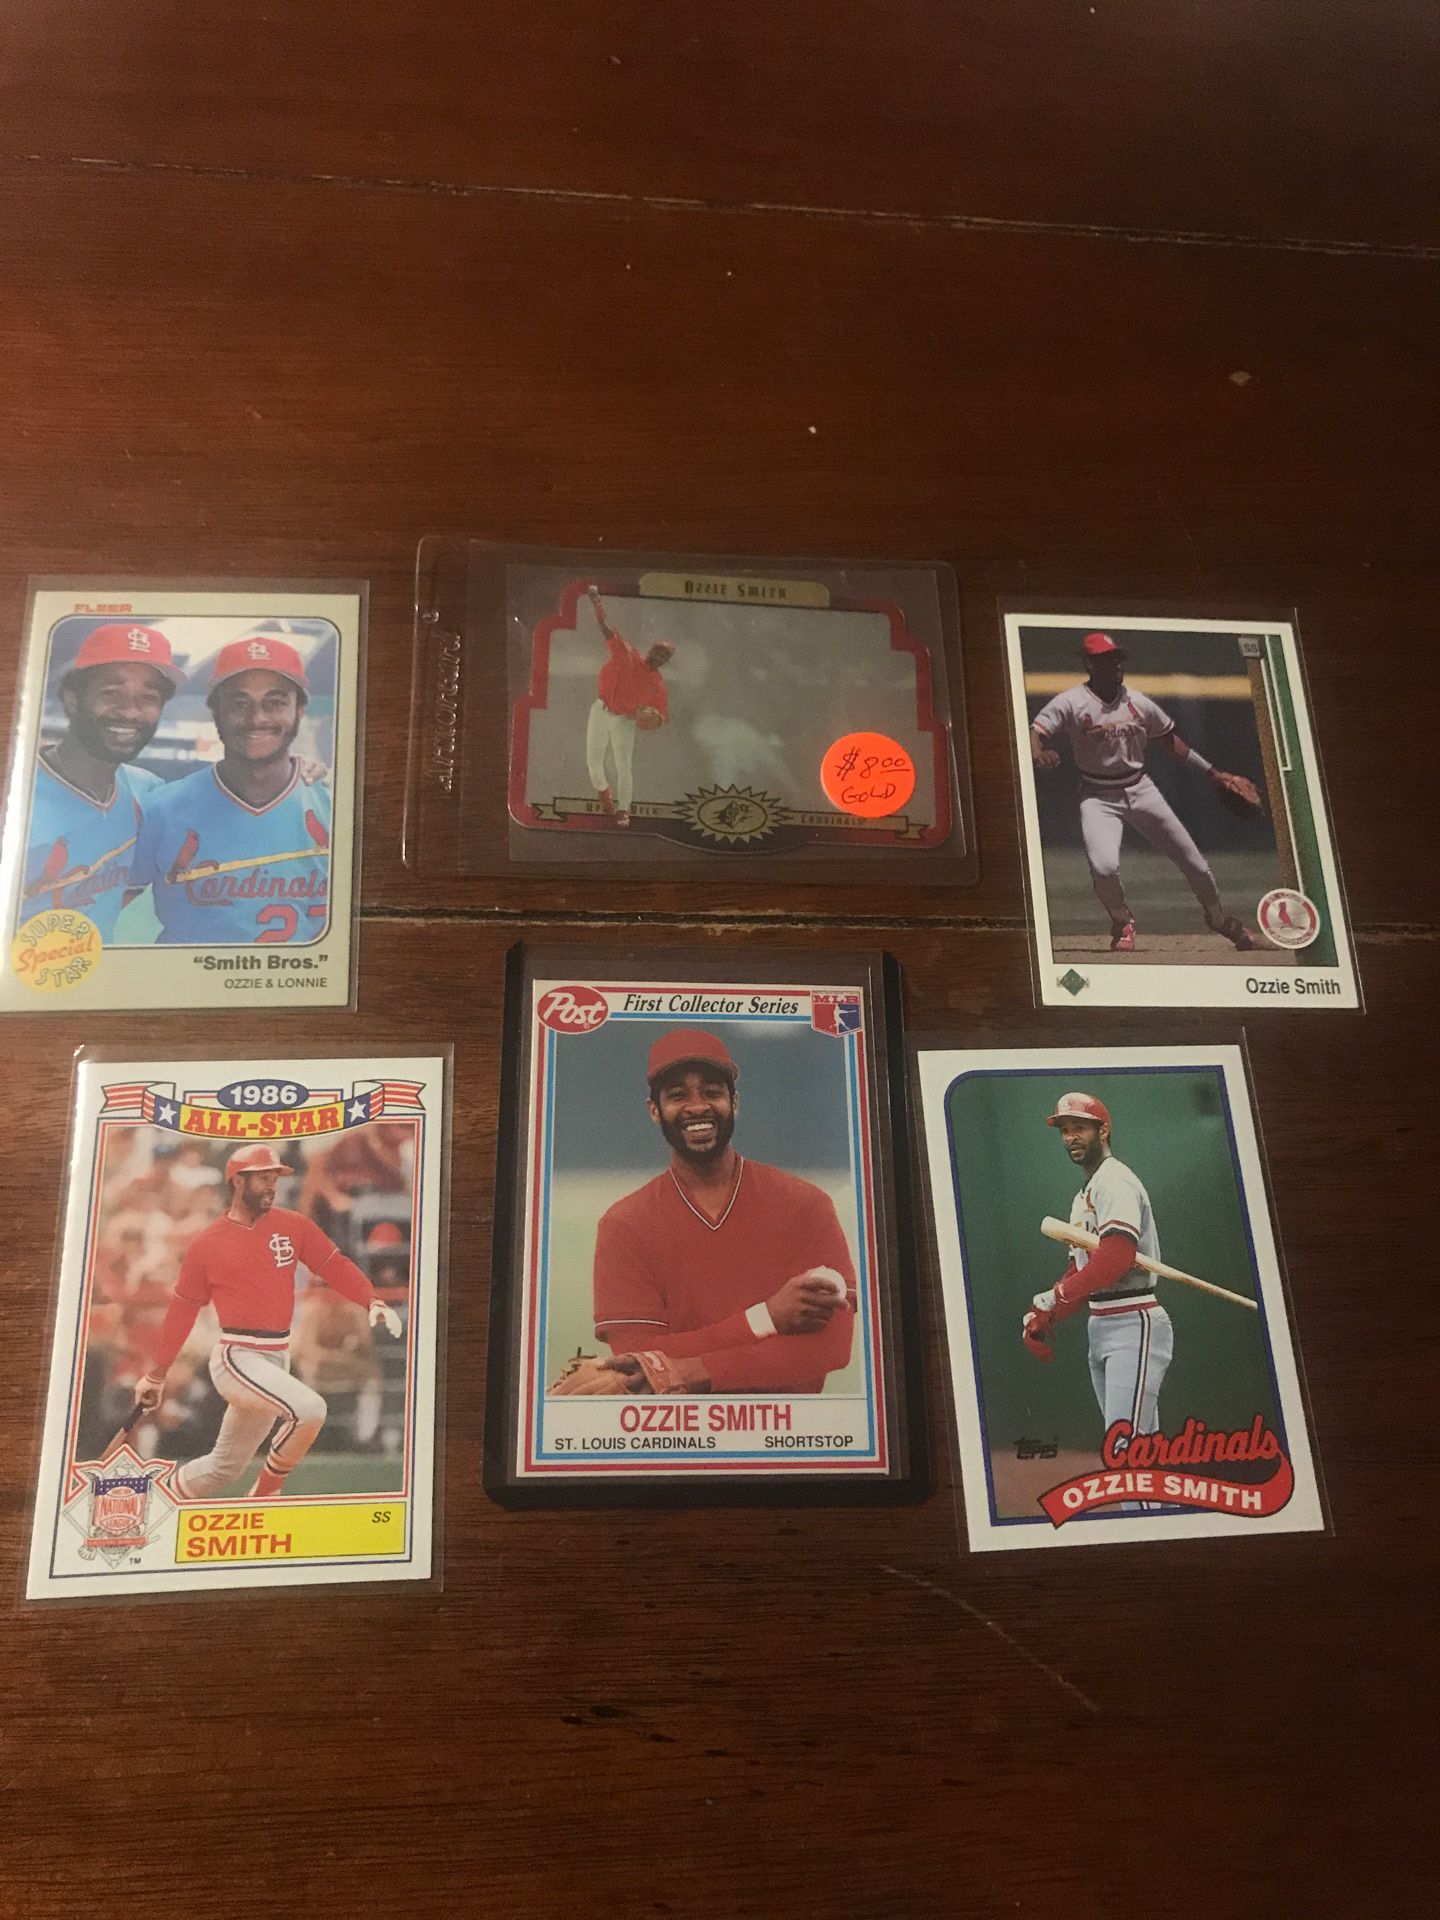 Baseball Ozzie Smith hologram card and other cards